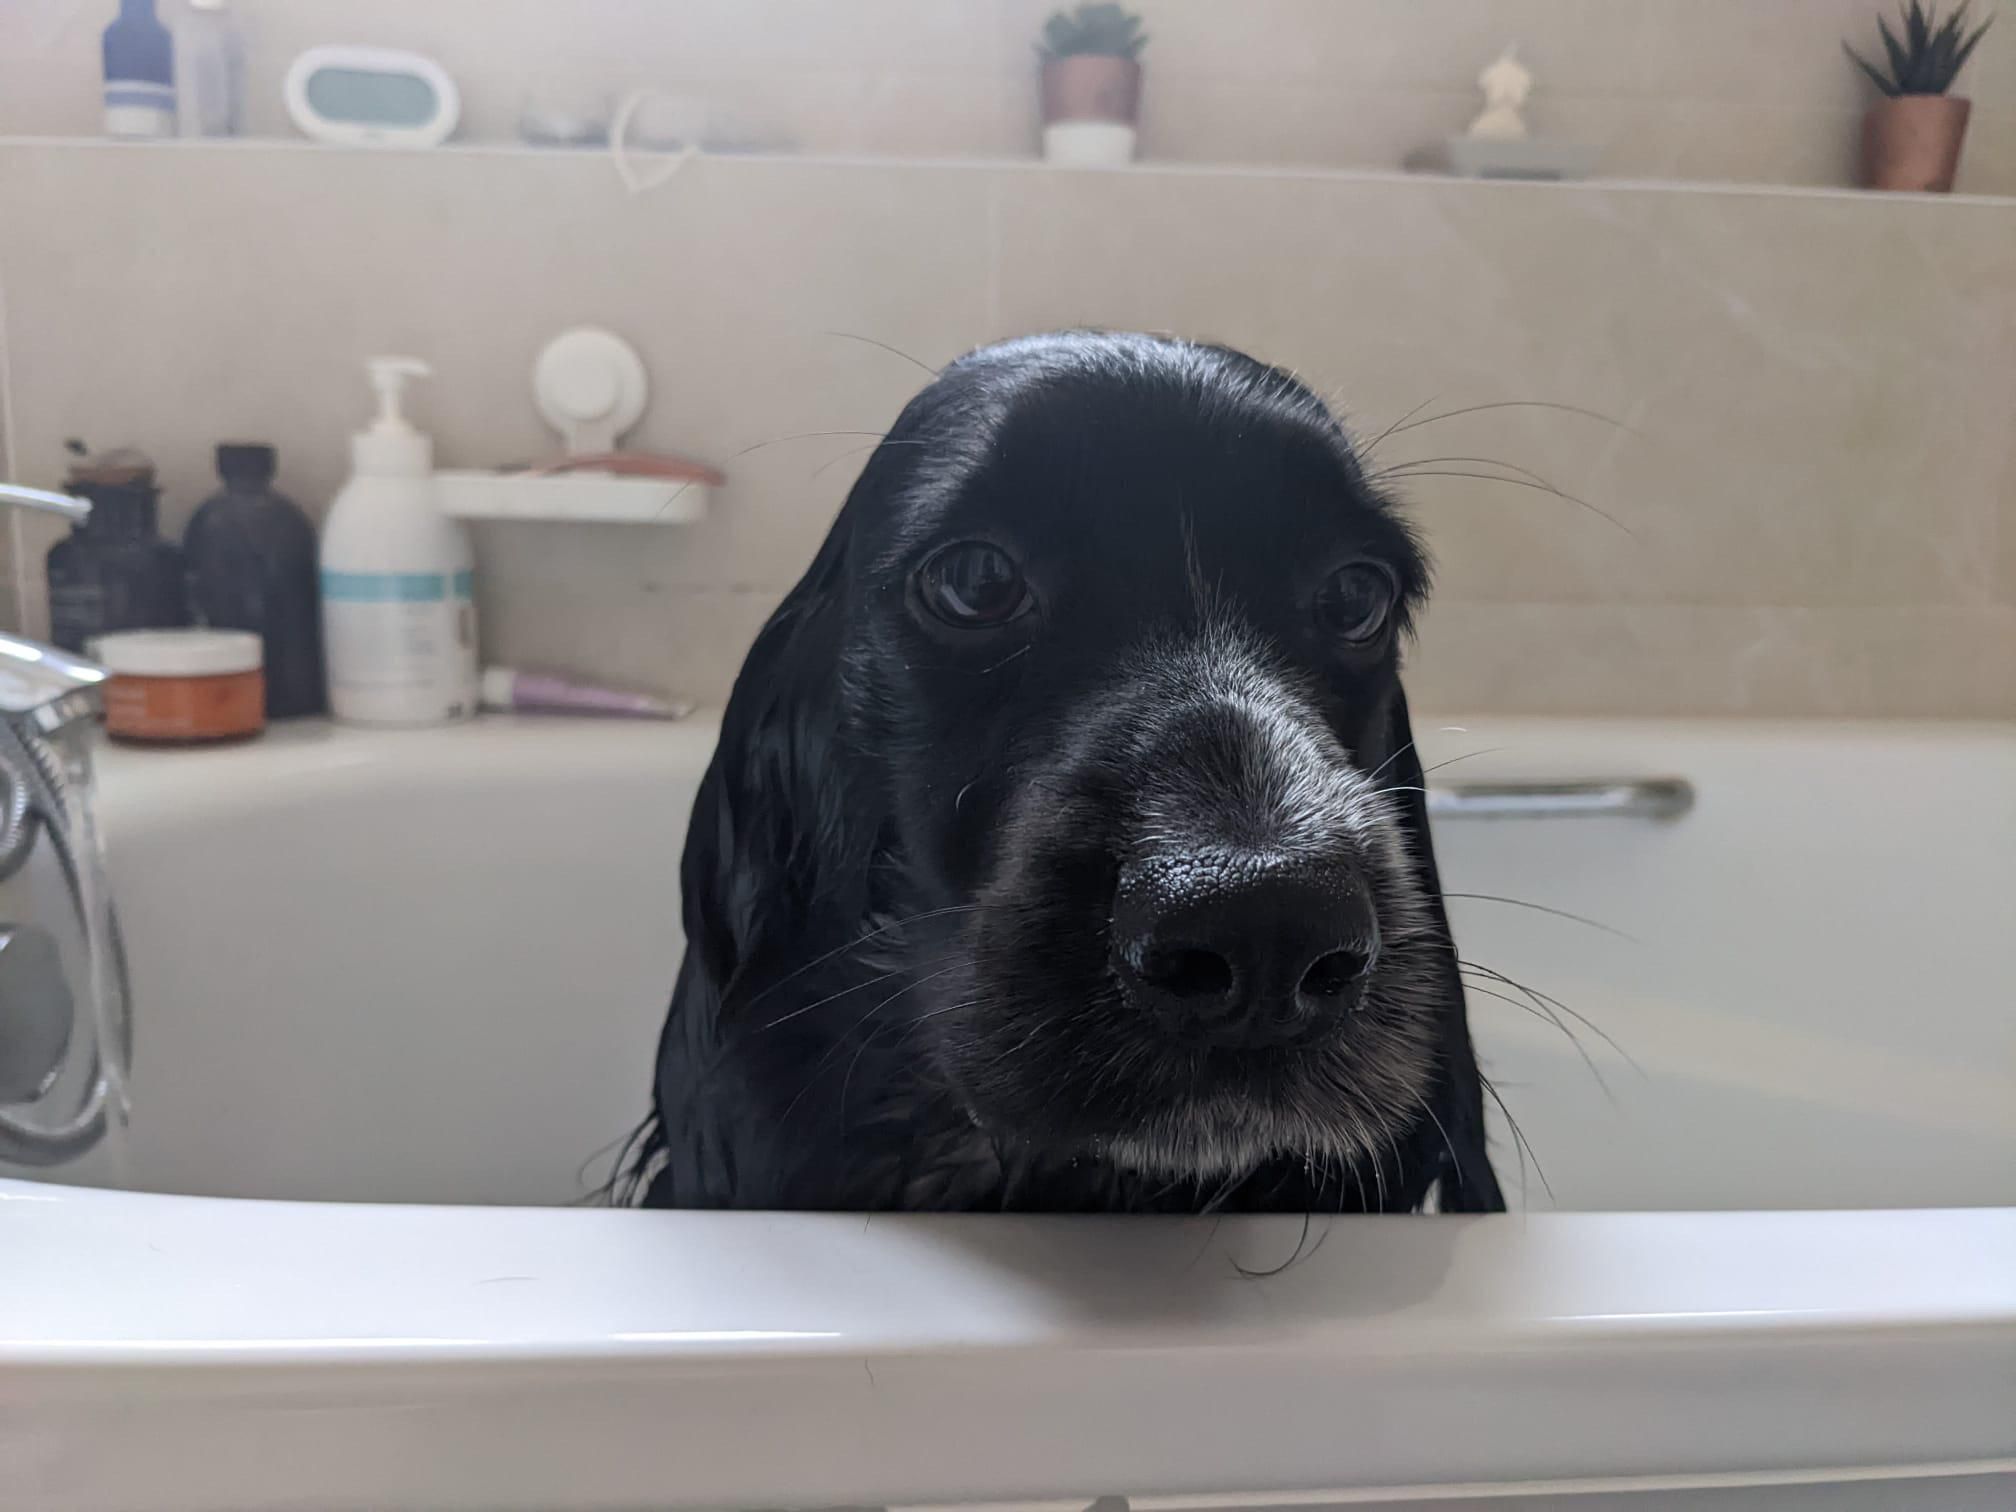 My dog looks very philosophical when he’s being bathed.